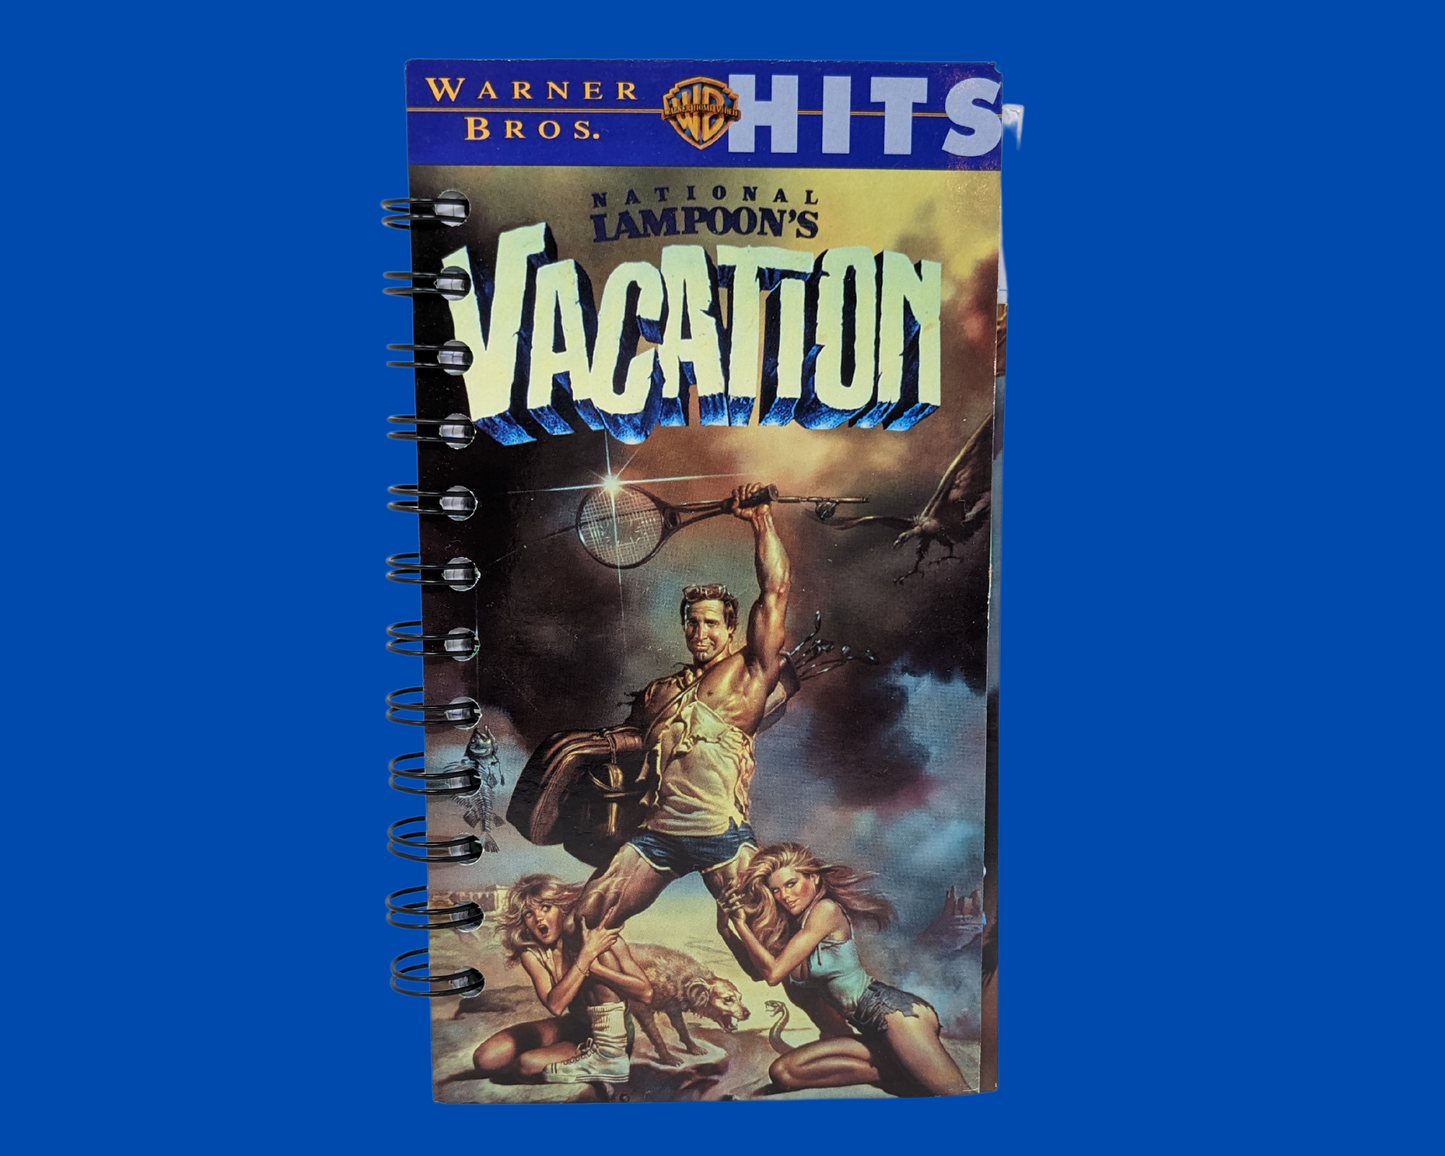 National Lampoon's Vacation VHS Movie Notebook